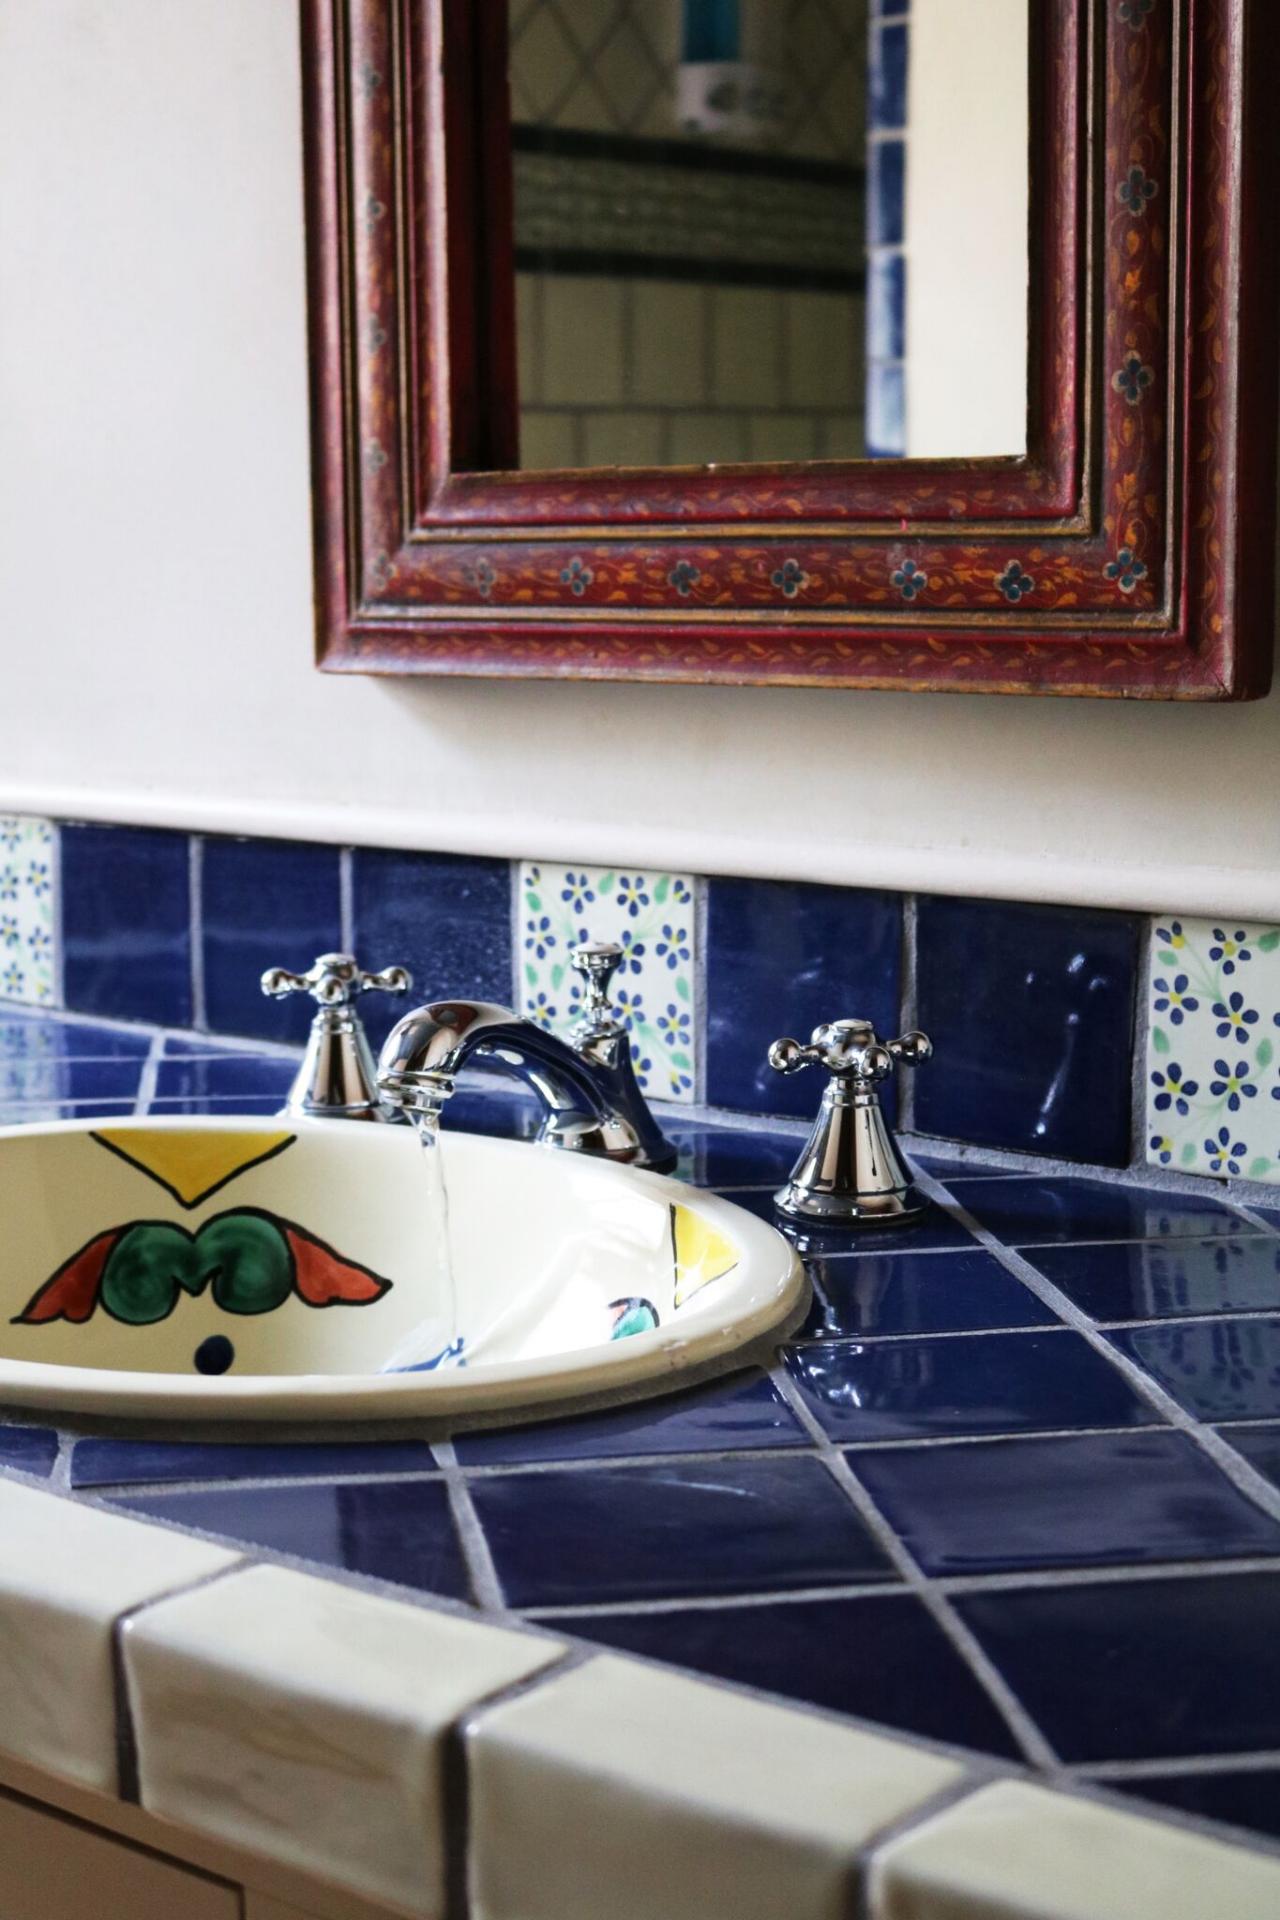 Ceramic Tile Bathroom Countertops, How To Install Tile On Formica Countertop